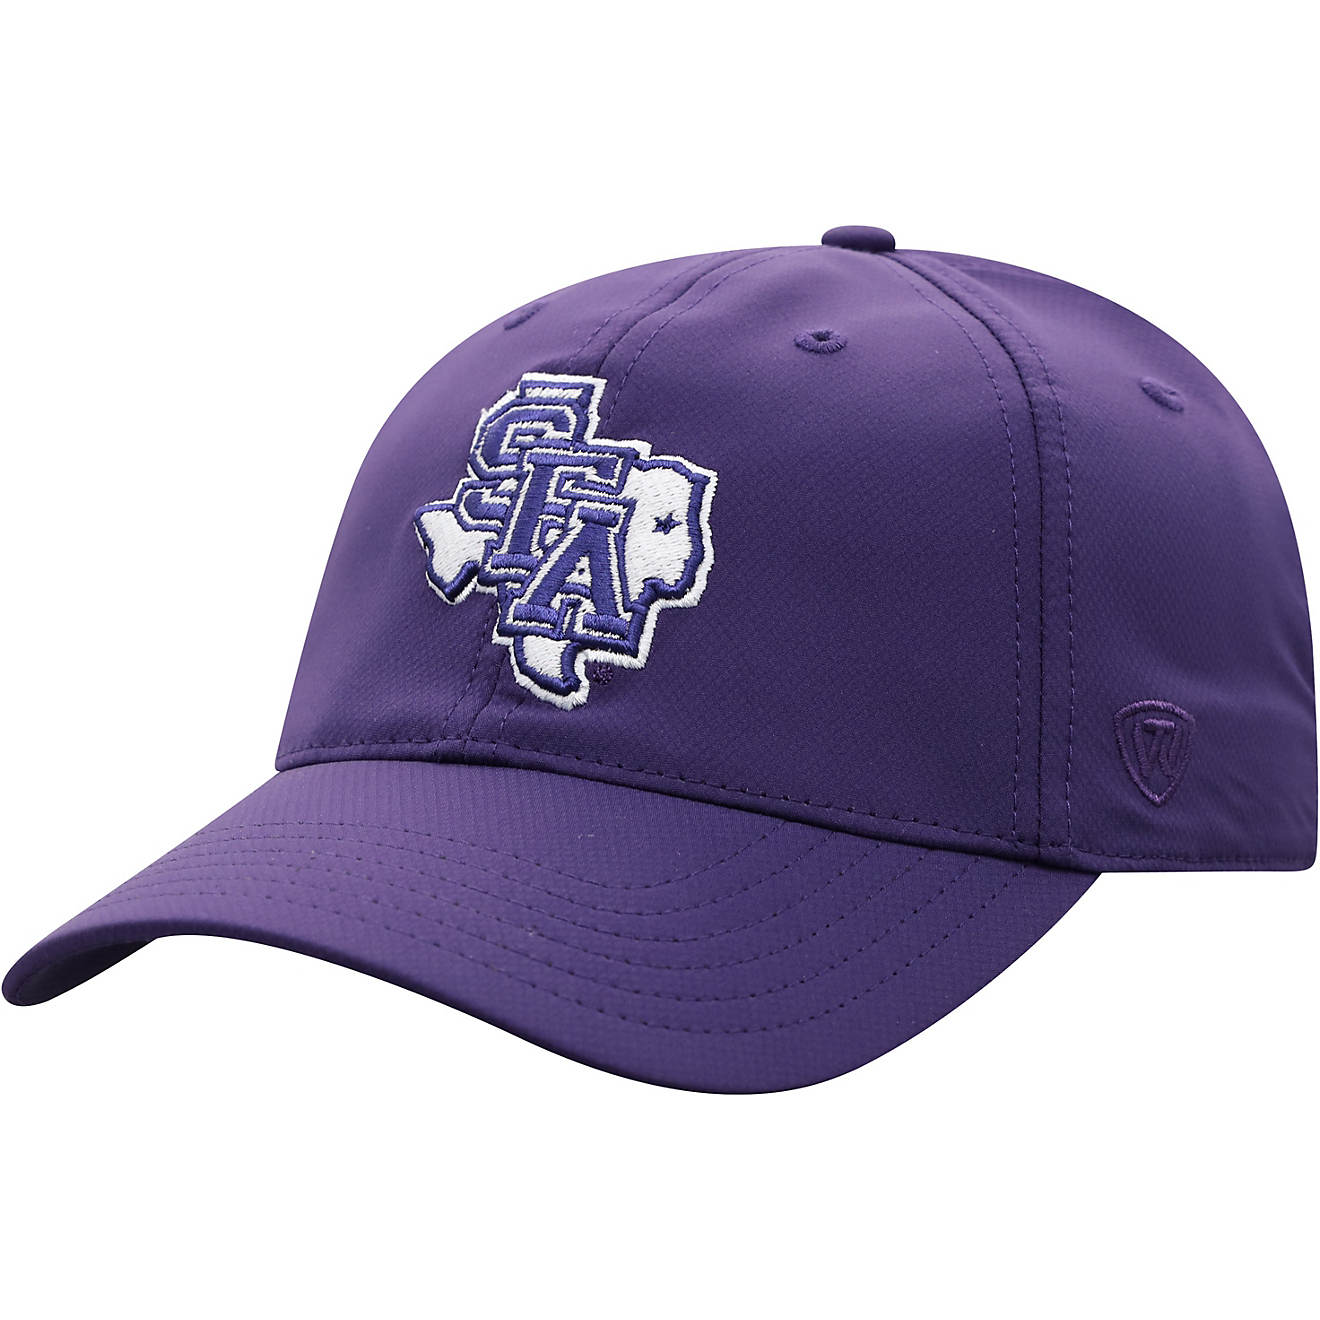 Top of the World Adults' Stephen F. Austin State University Trainer 20 Adjustable Team Color Cap                                 - view number 1